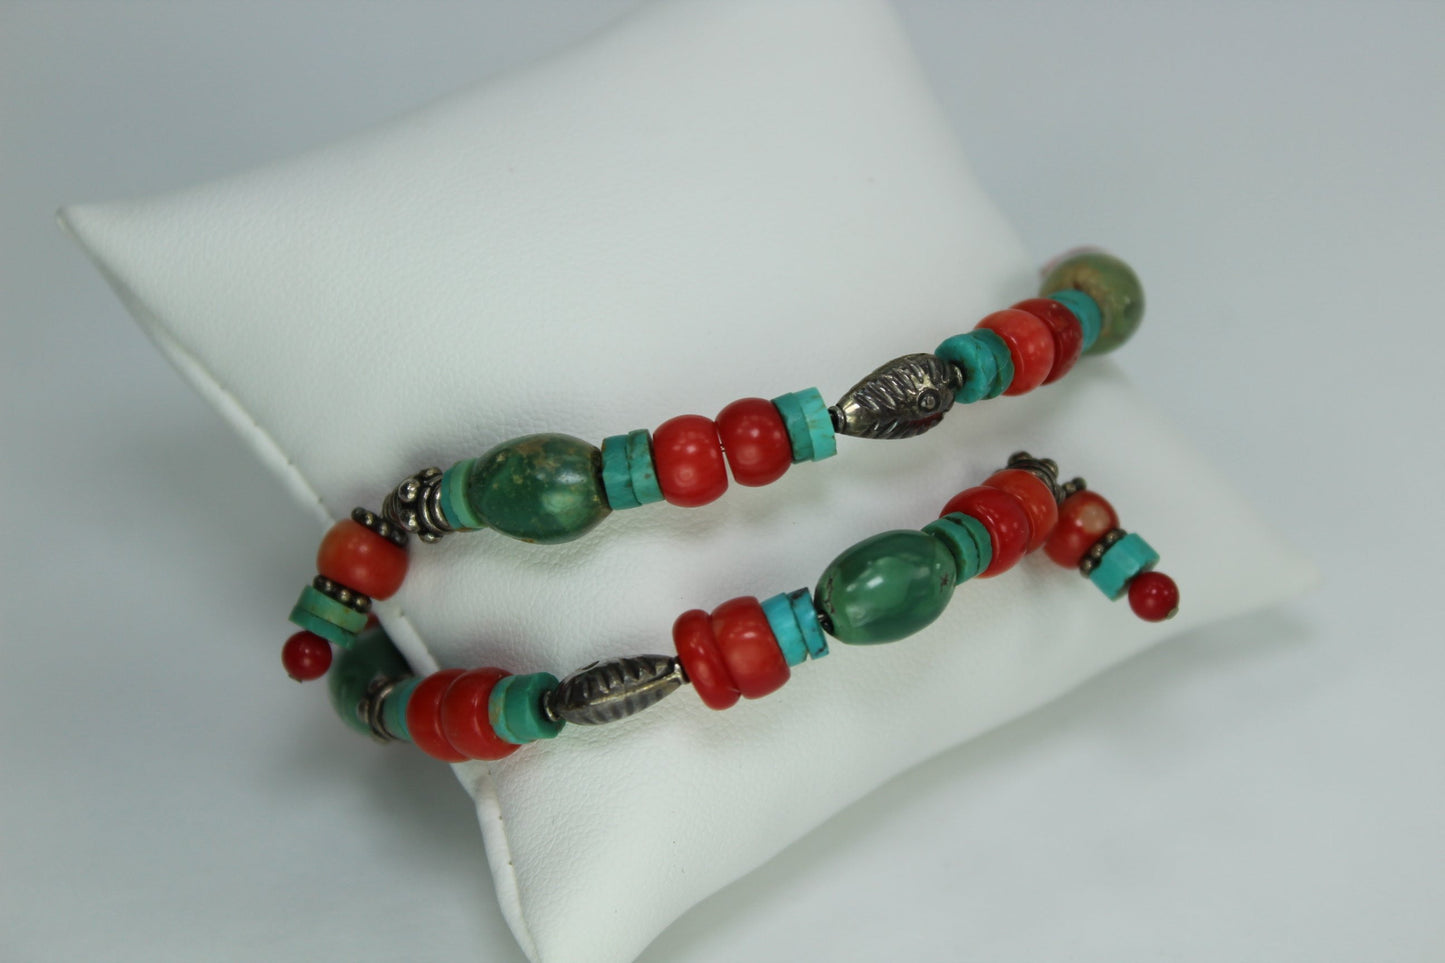 Bracelet Turquoise Coral Red Stones Silver Beads Variety Shapes Wired Adjustable unusual